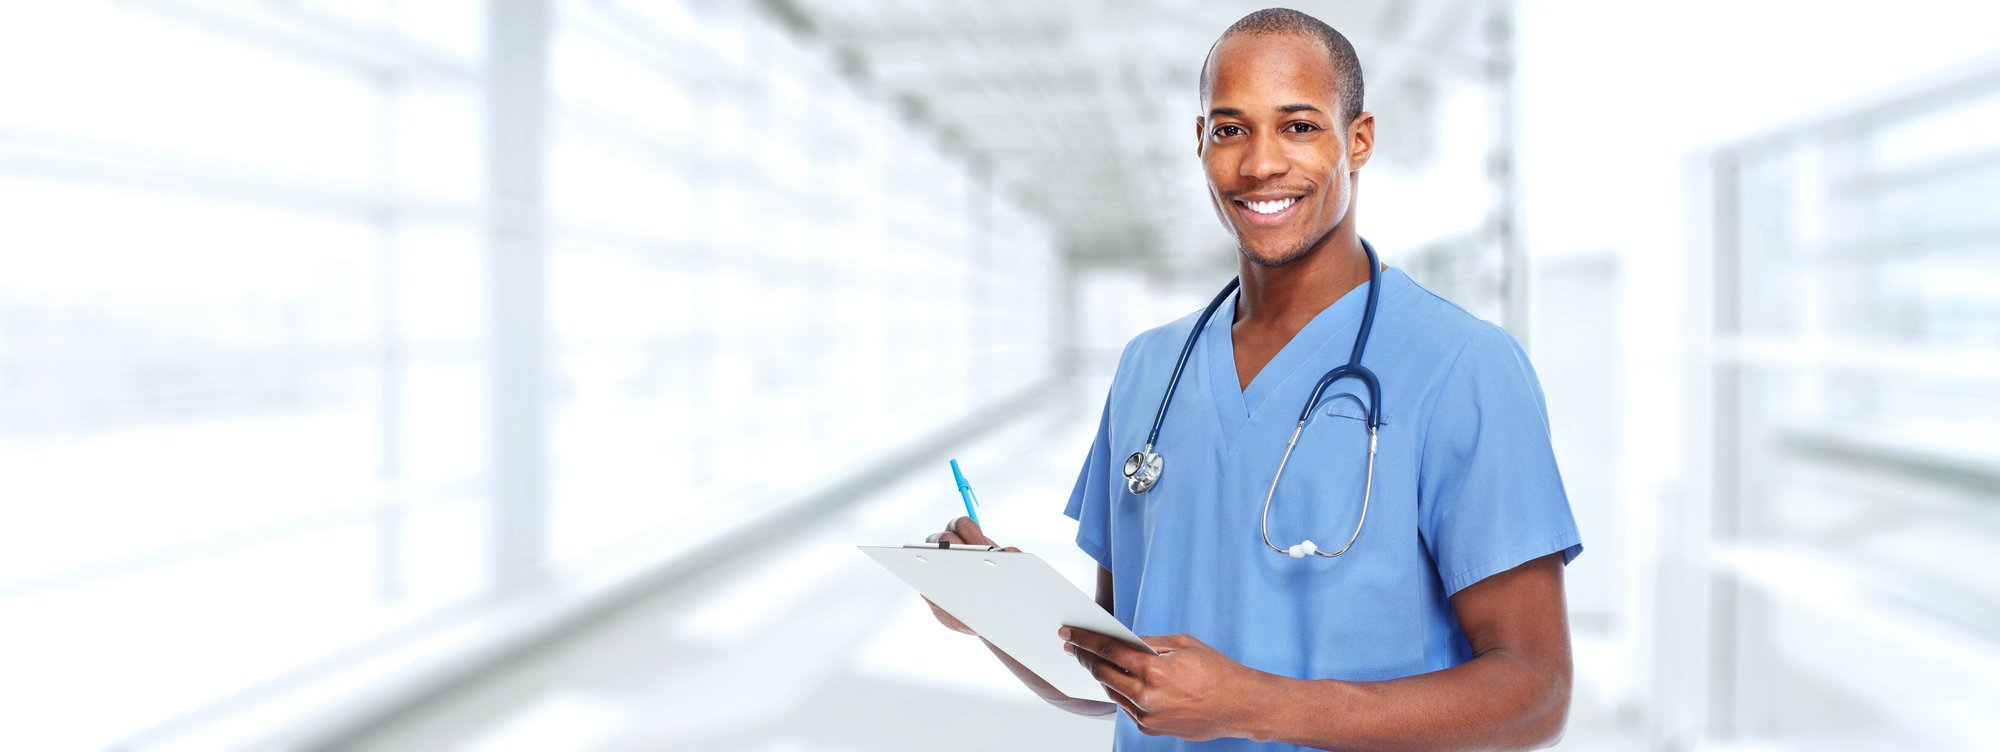 Top Nursing Certifications for RNs to Get in 2022 - Nightingale